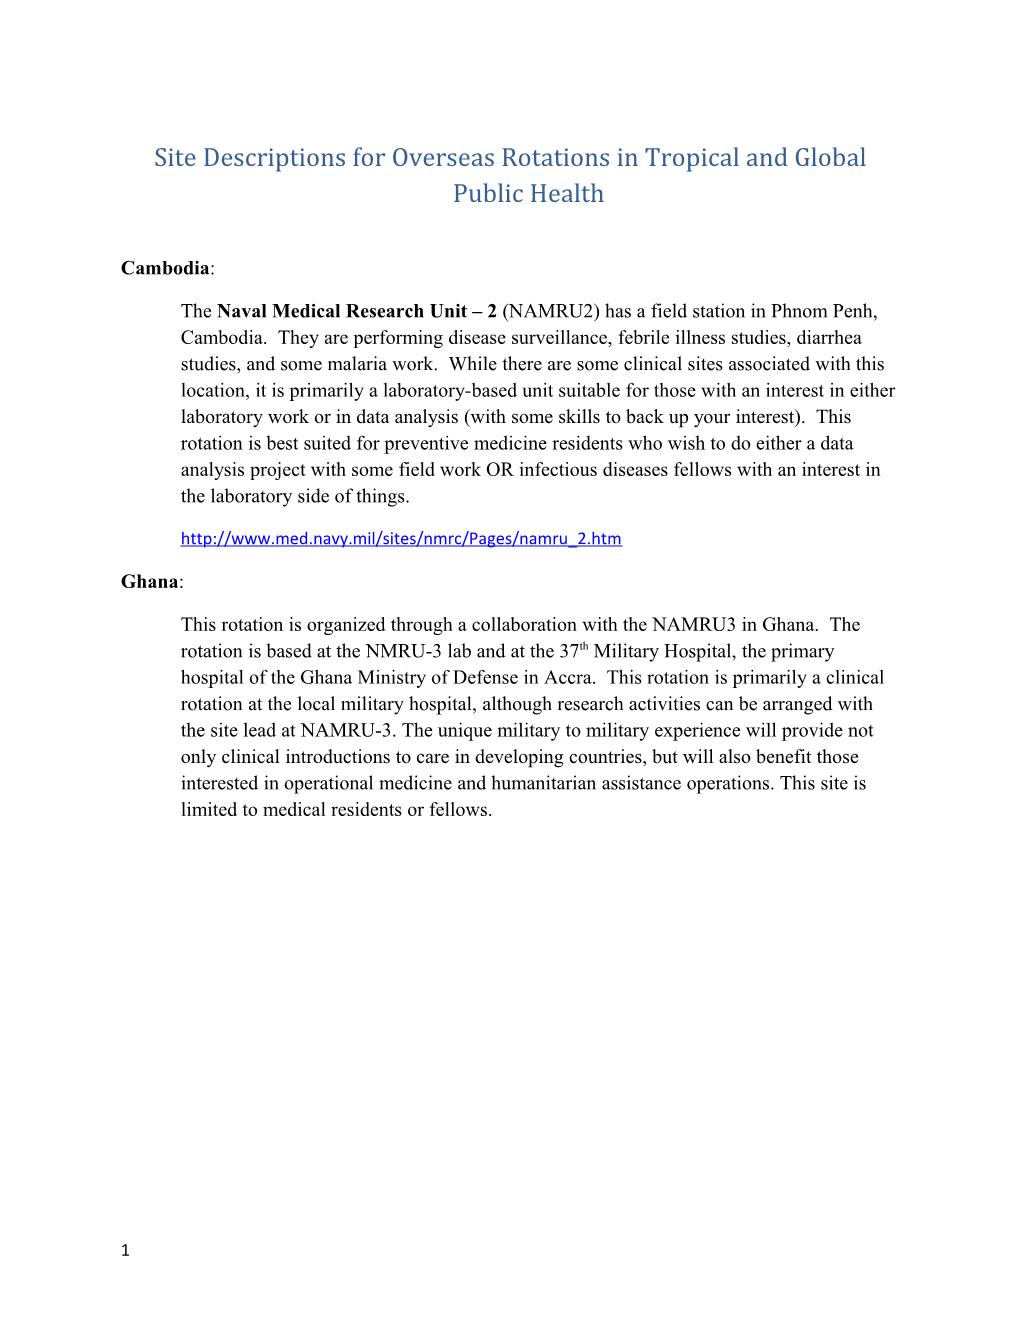 Site Descriptions for Overseas Rotations in Tropical and Global Public Health